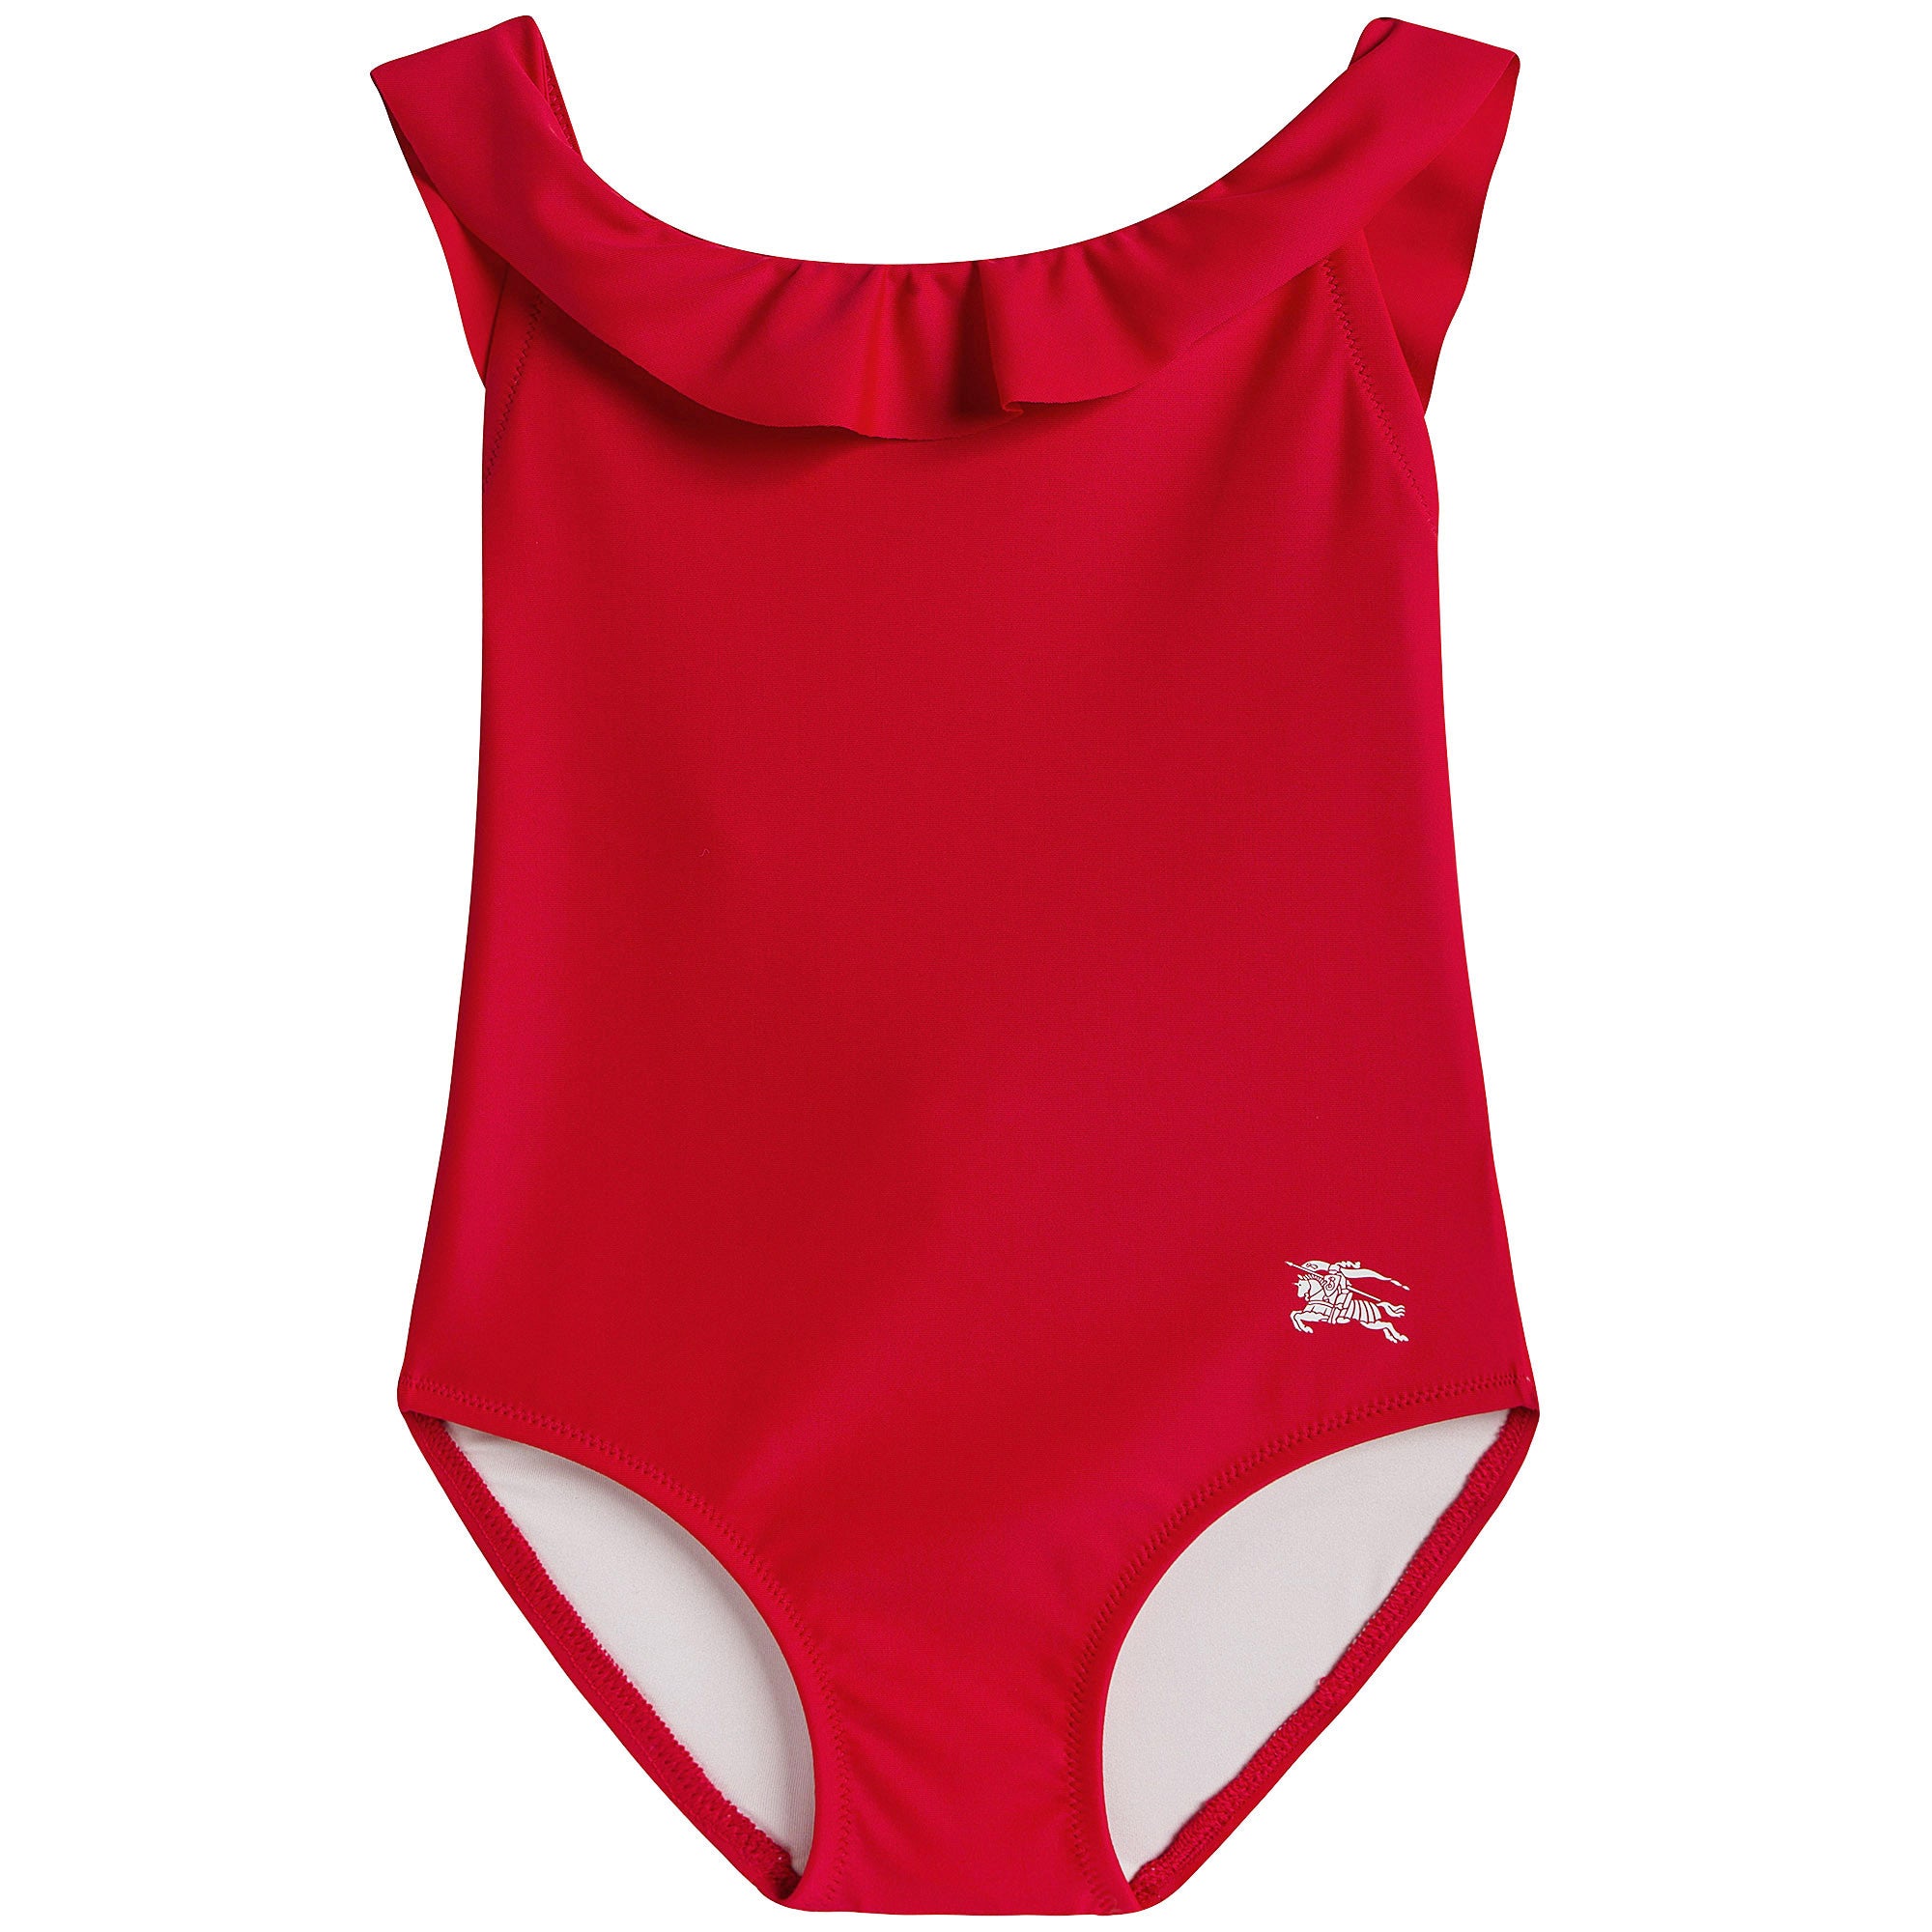 Girls Red Lotus Leaf With Swimsuit - CÉMAROSE | Children's Fashion Store - 1